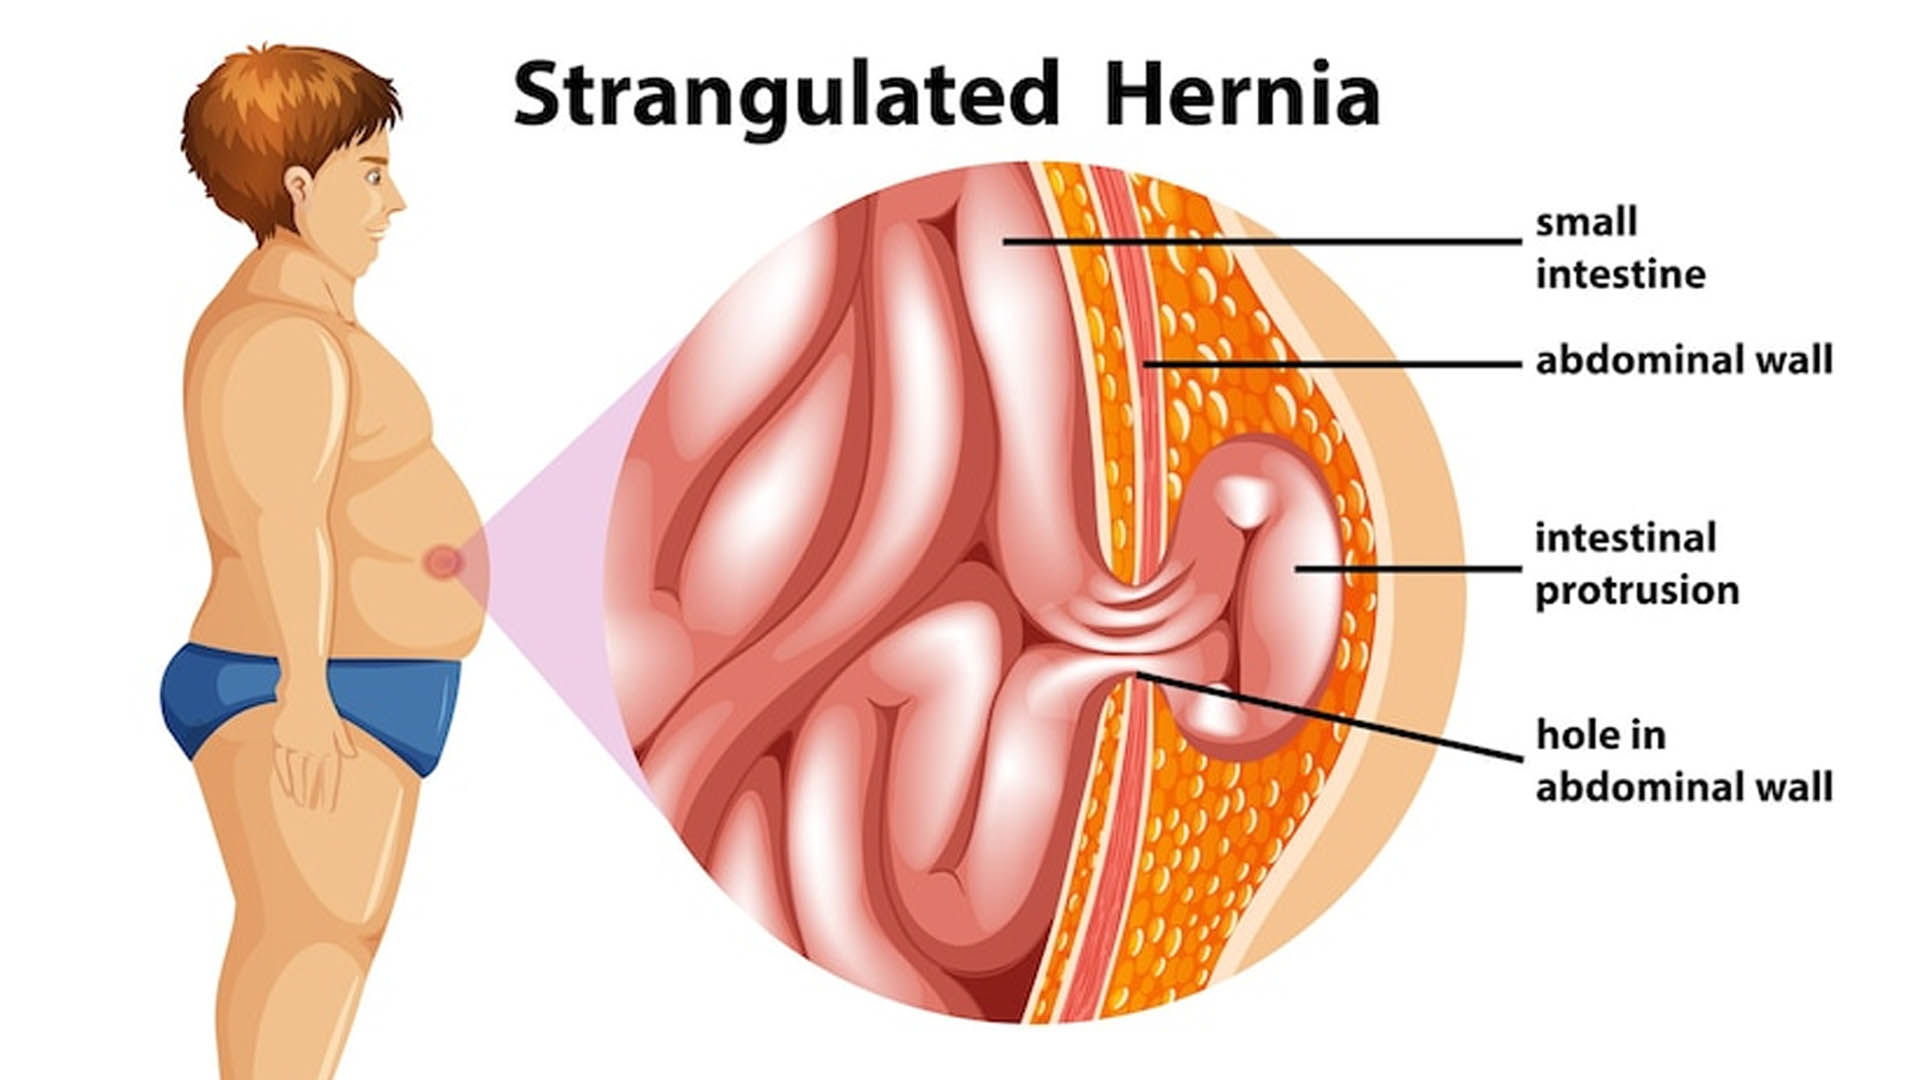 Hernia: Types, Symptoms, Causes, Risk Factors and Diet